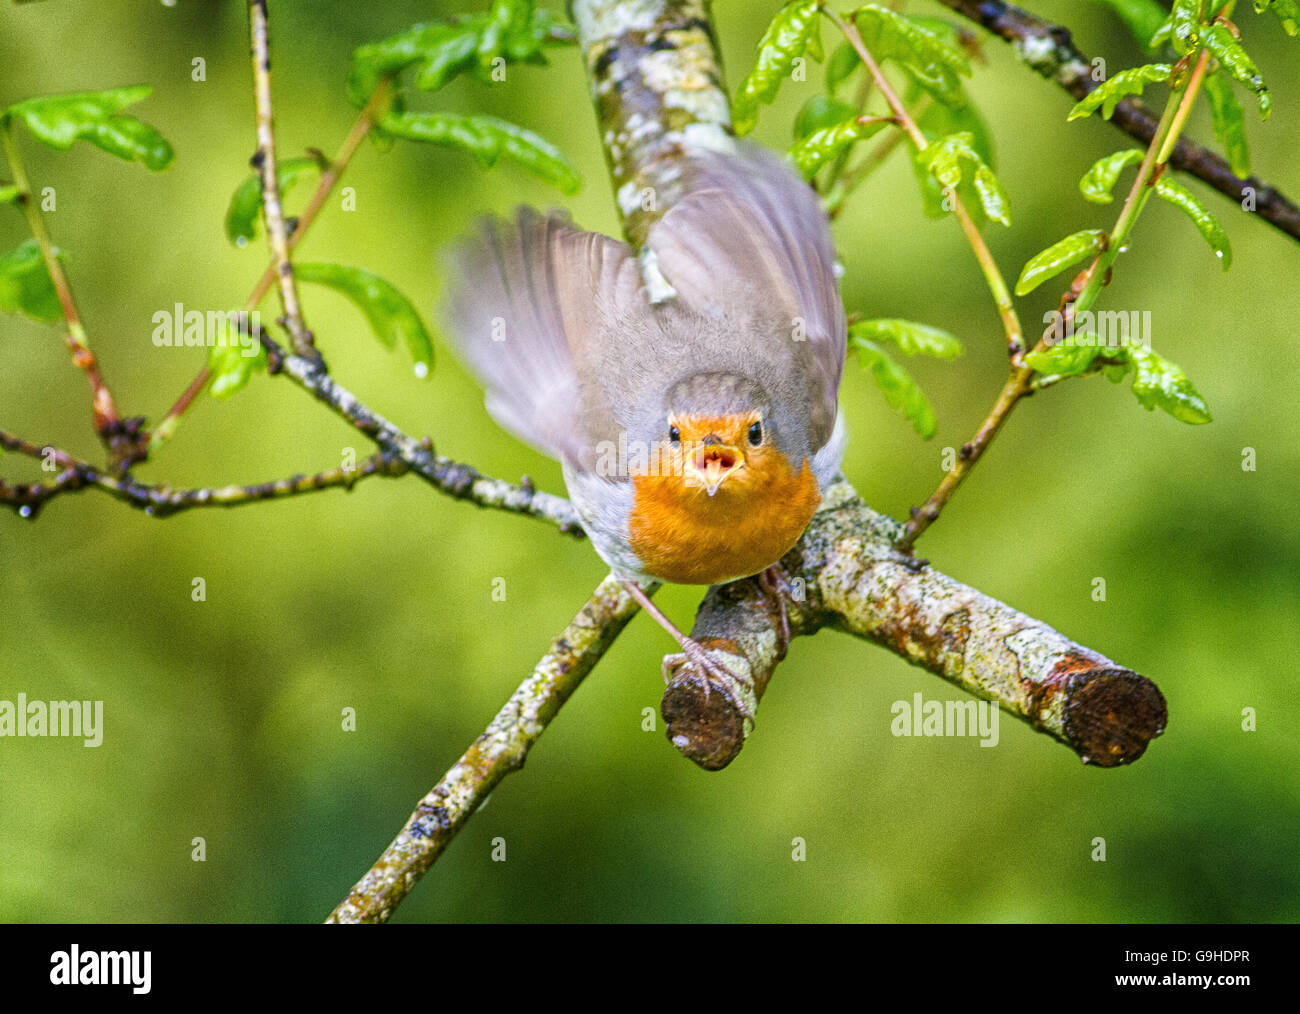 Adult robin begging for food by squarking and flapping for attention.  Fluttering her wings. Stock Photo